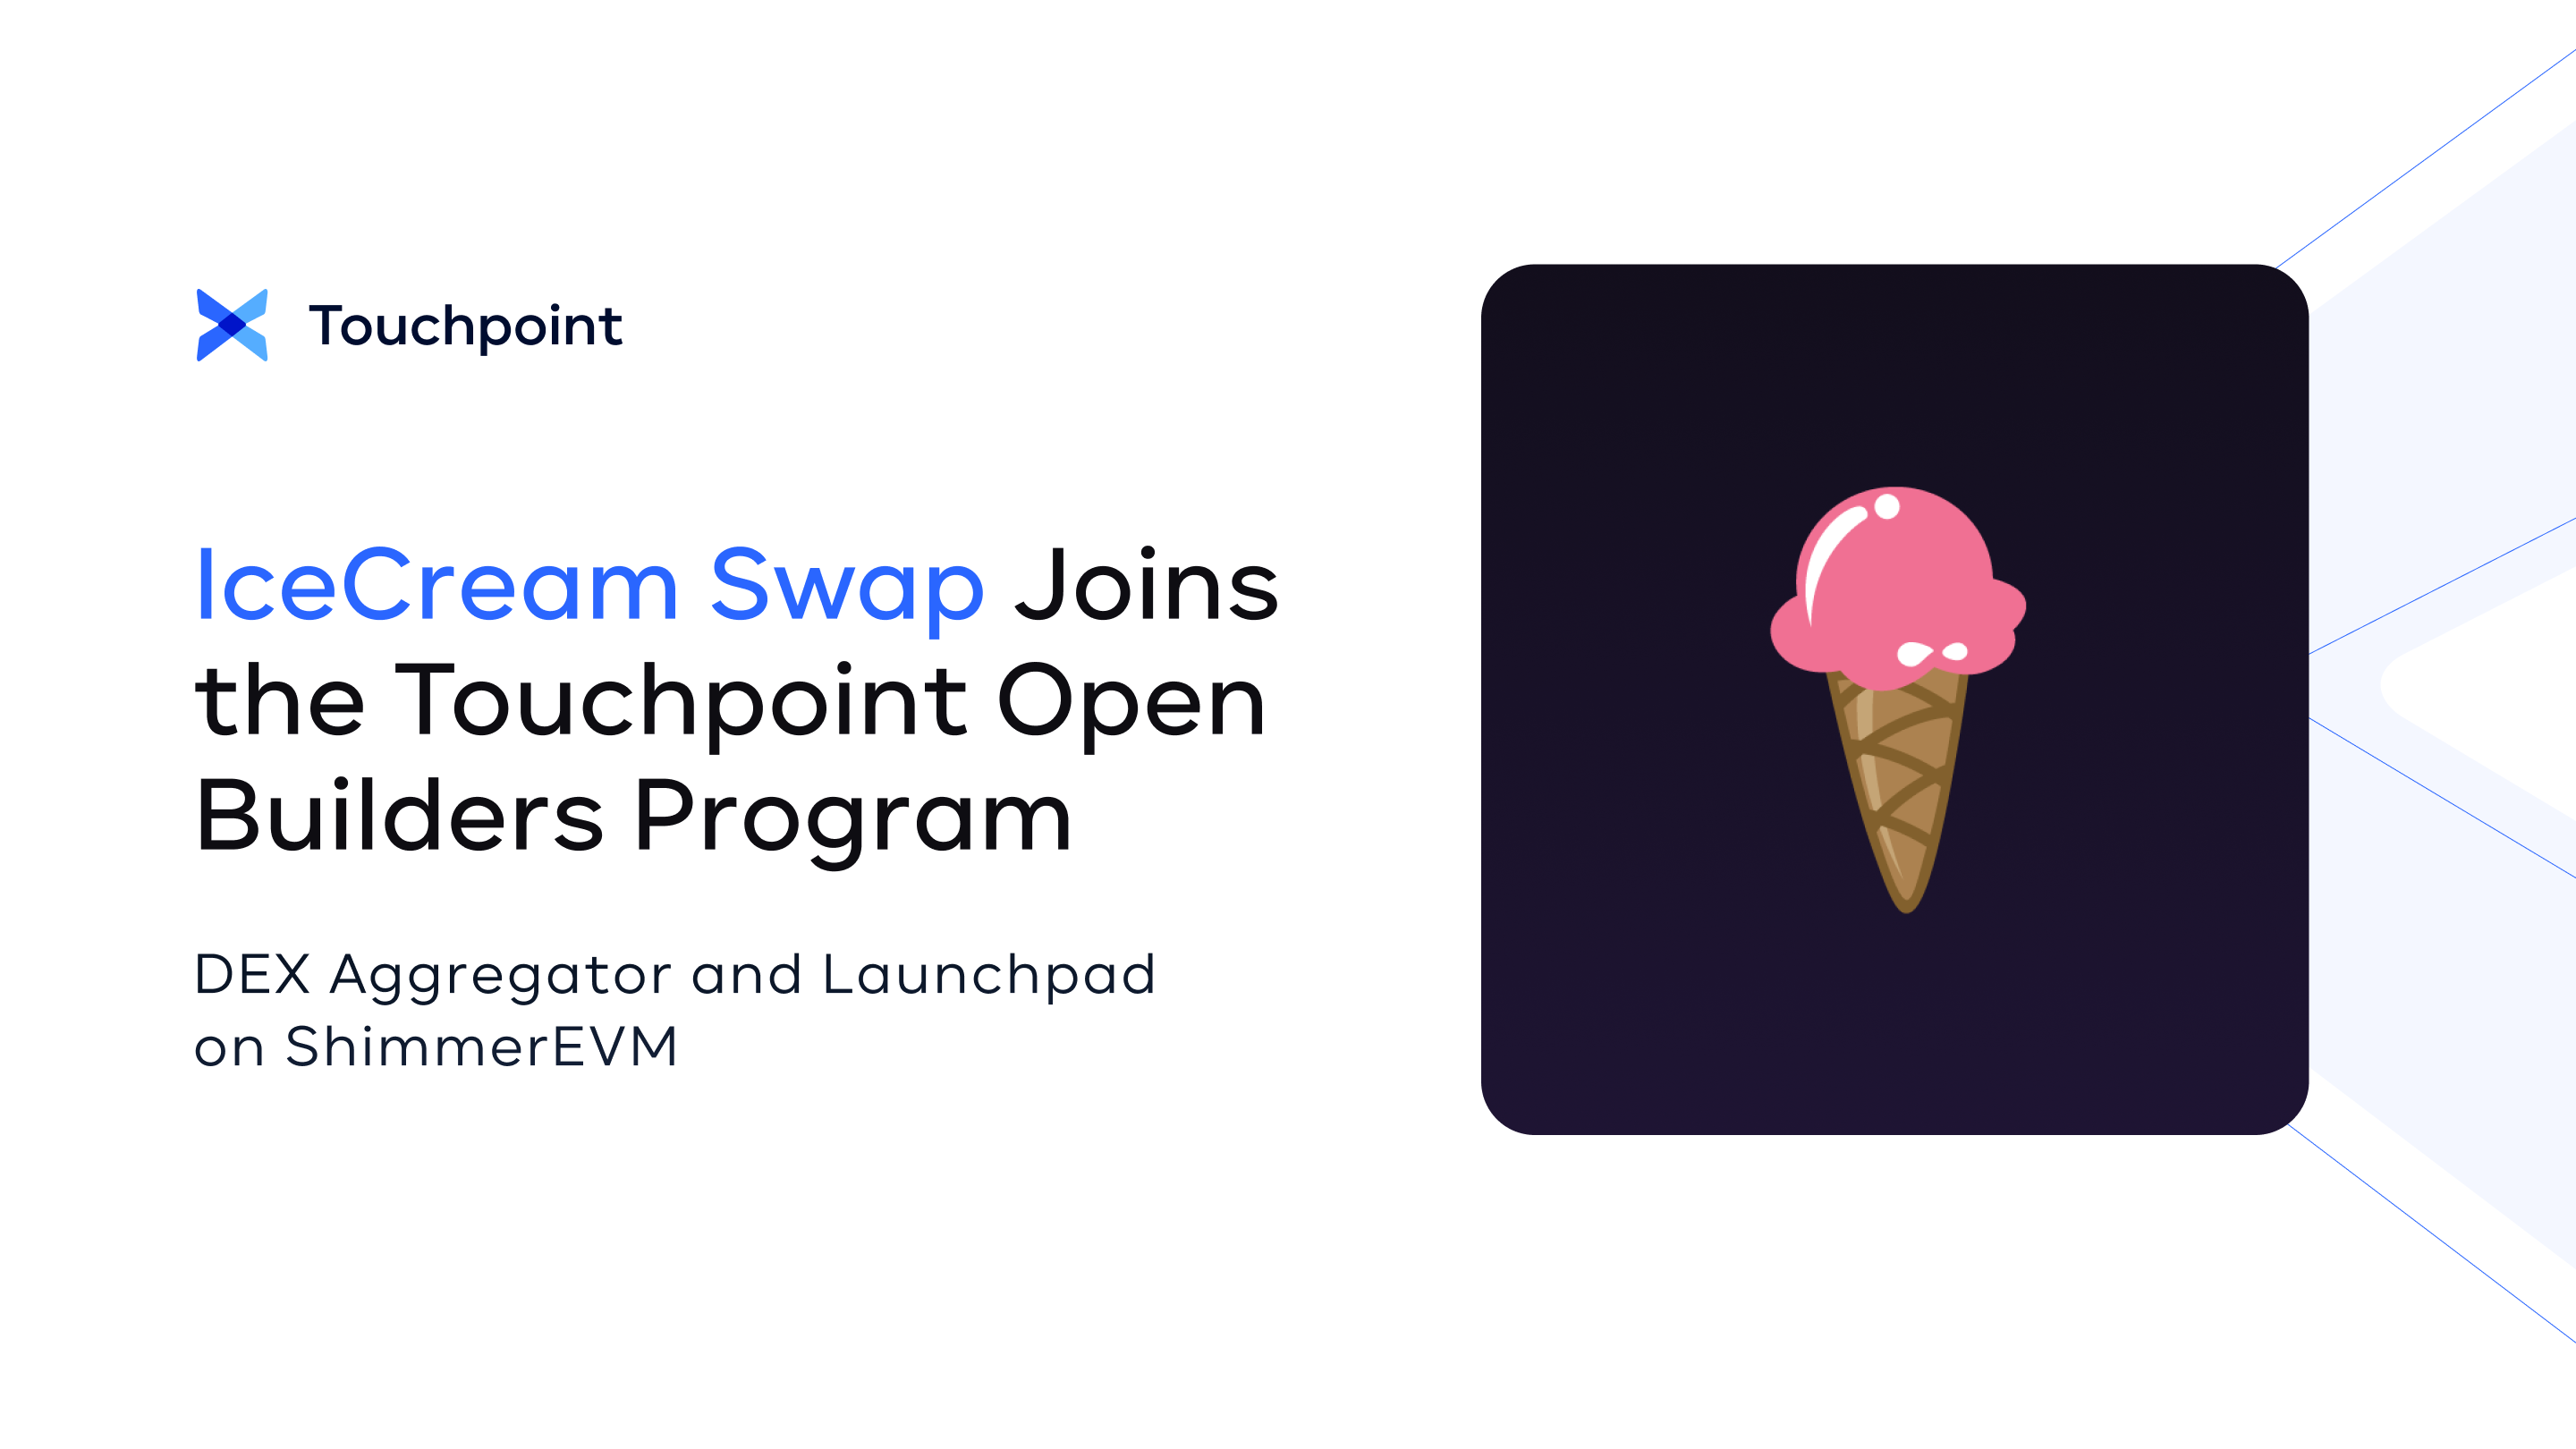 IceCreamSwap joins Touchpoint